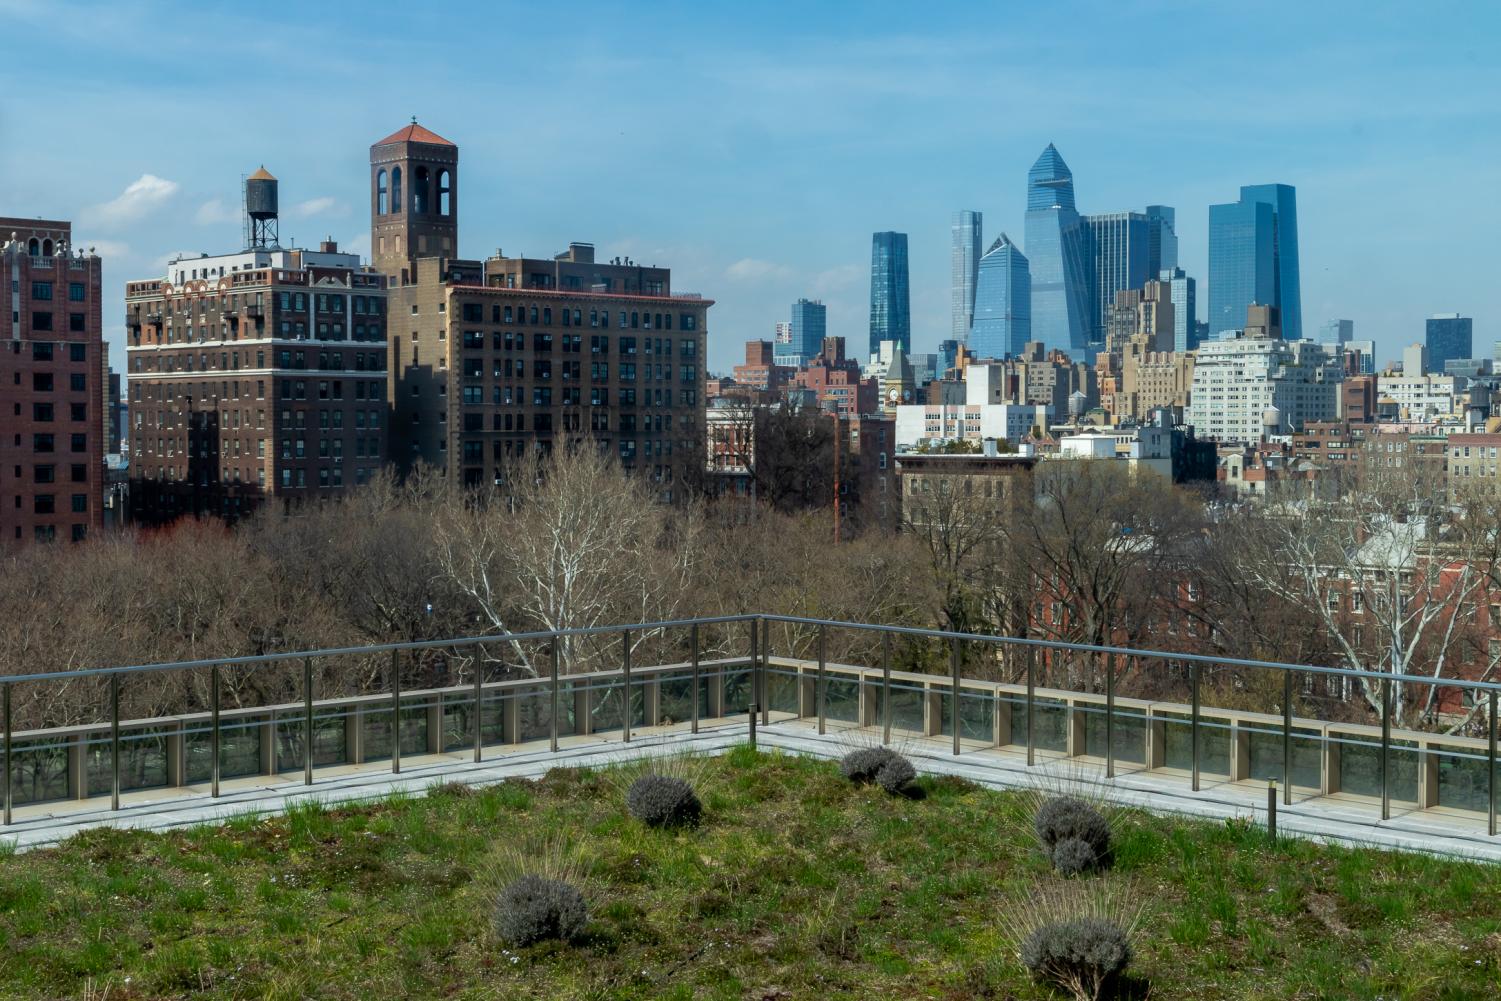 NYU’s grassy green roof with shrubs, located on top of the university’s Global Center for Academic and Spiritual Life.